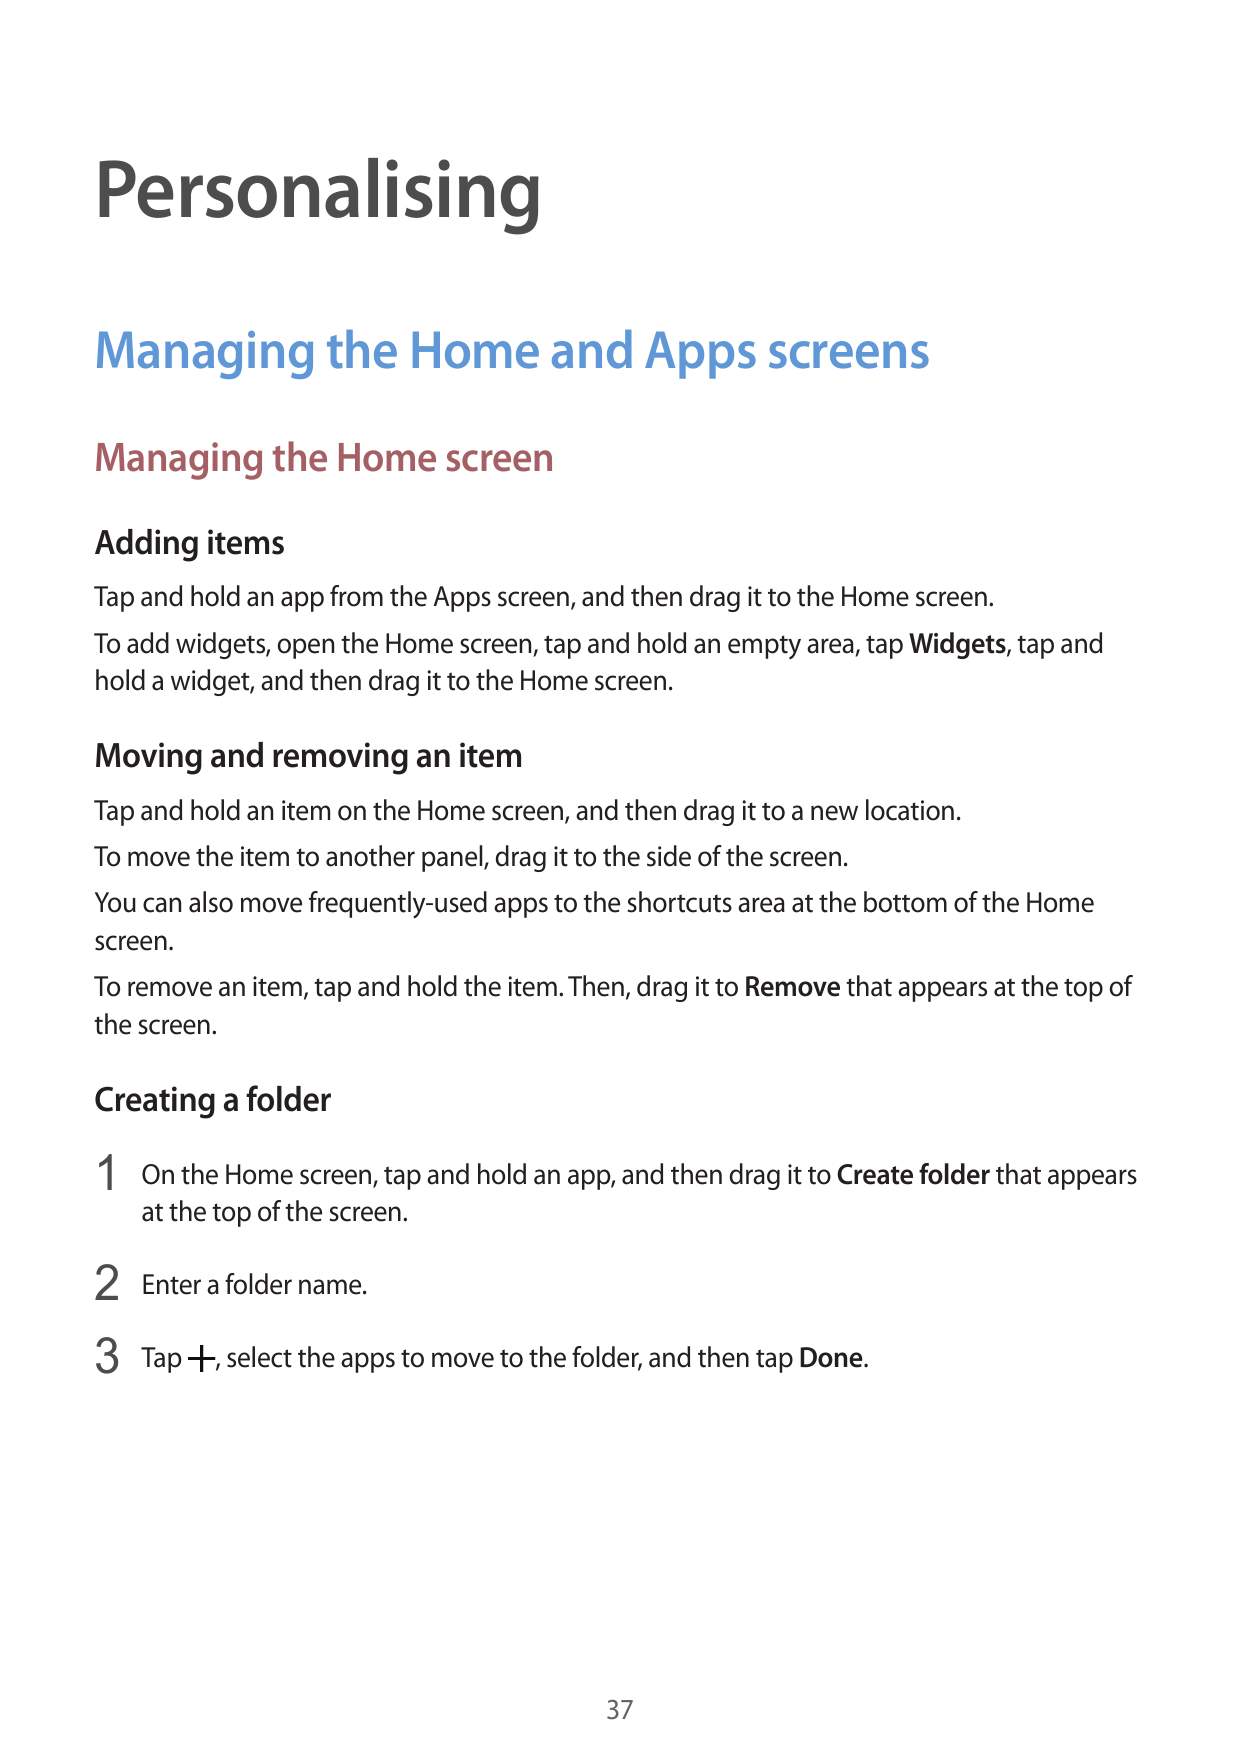 PersonalisingManaging the Home and Apps screensManaging the Home screenAdding itemsTap and hold an app from the Apps screen, and